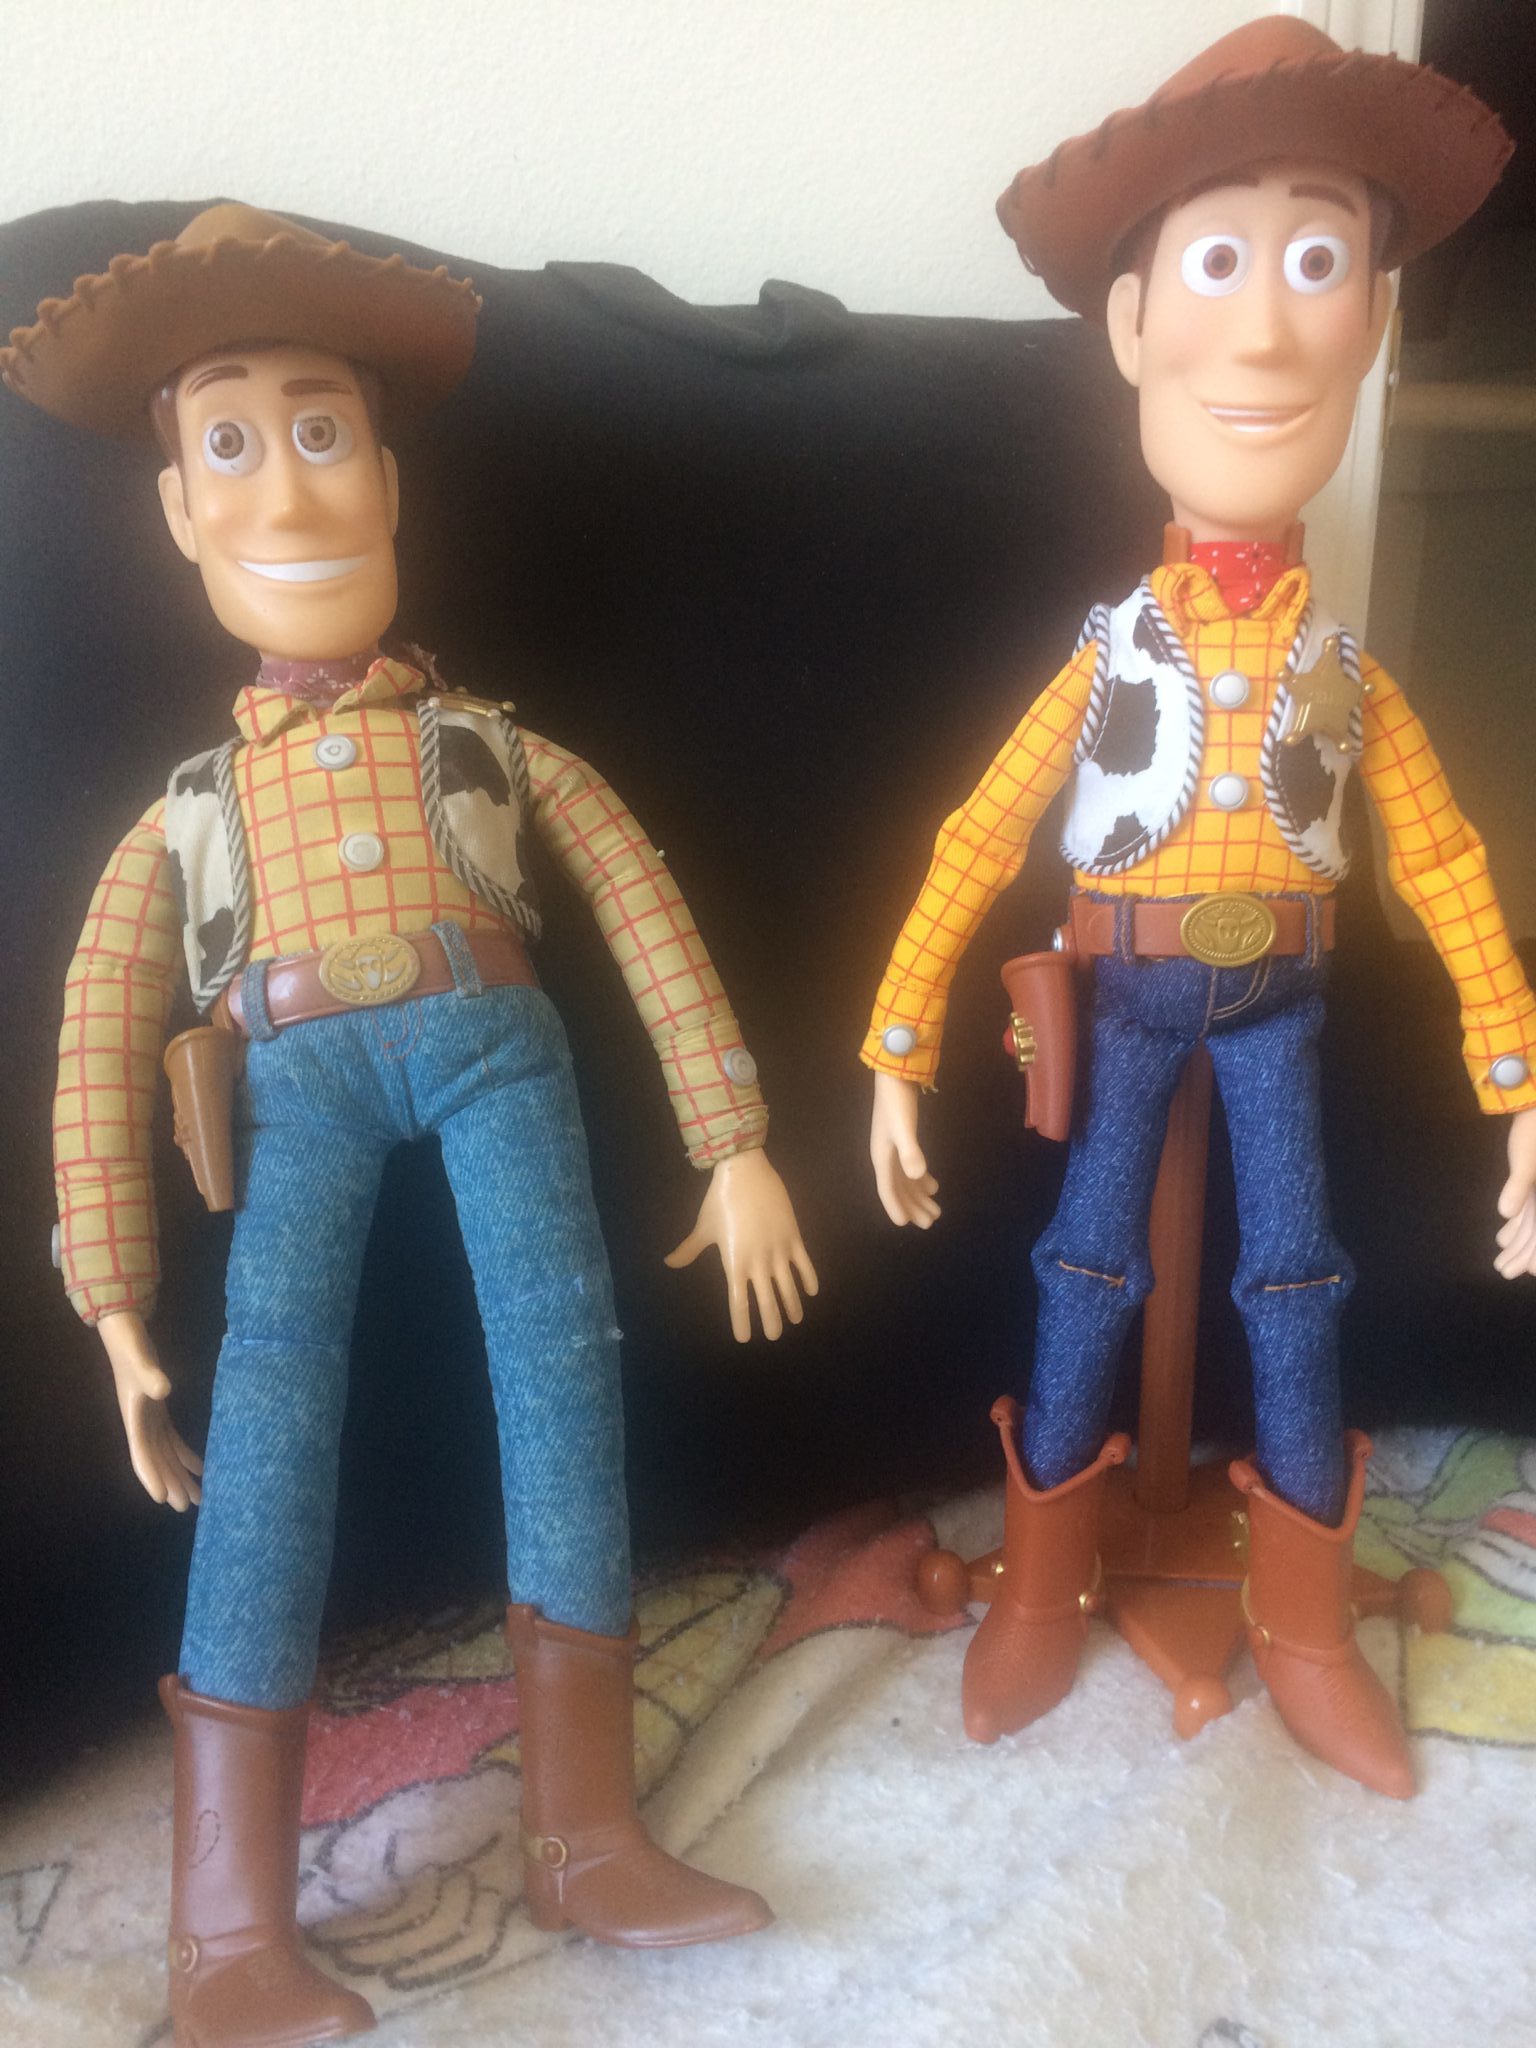 sheriff woody signature collection